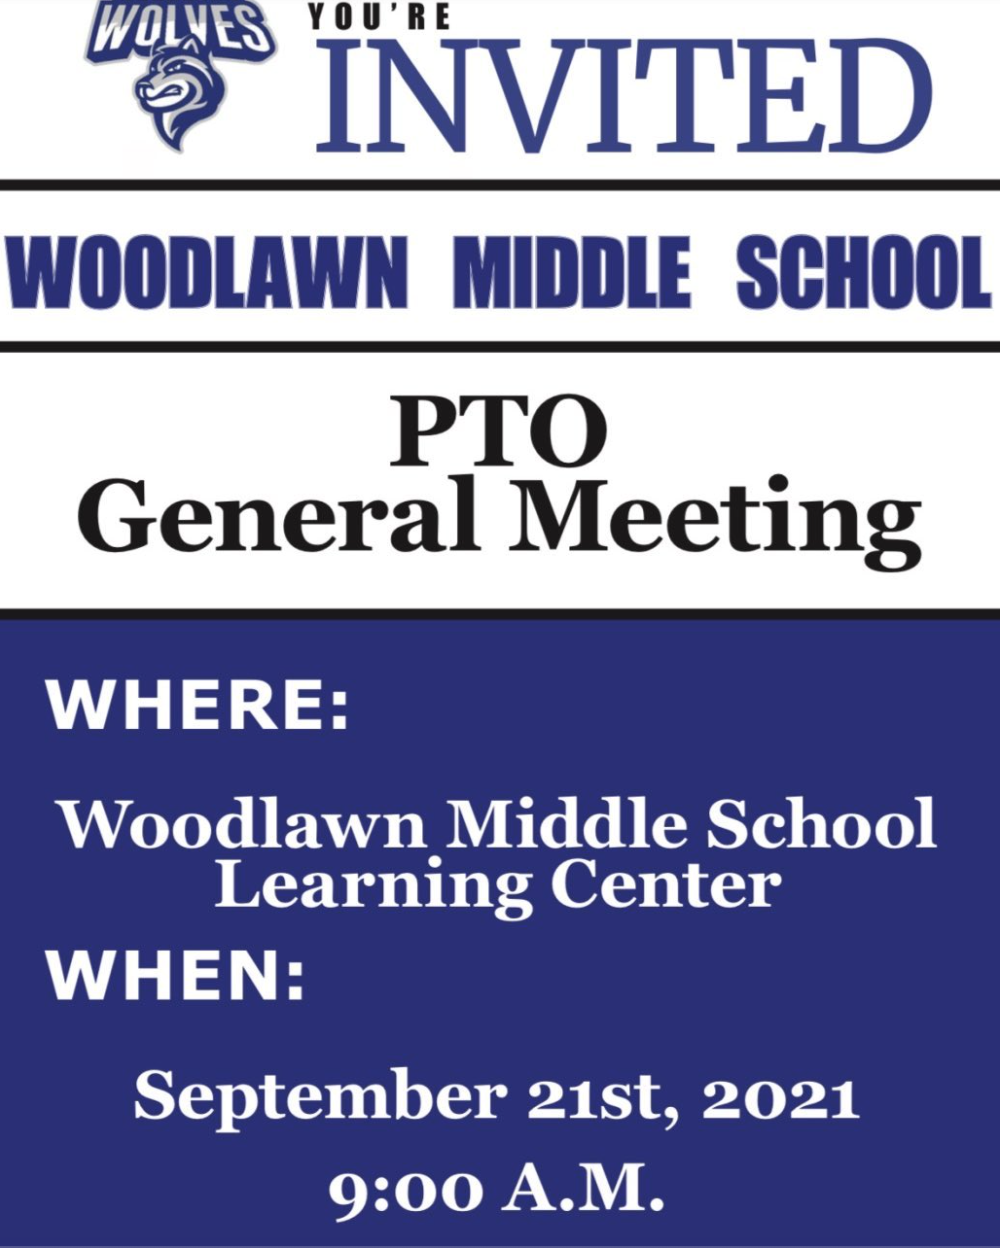 Woodlawn PTO Invites You: General Meeting, Sept. 21, 2021